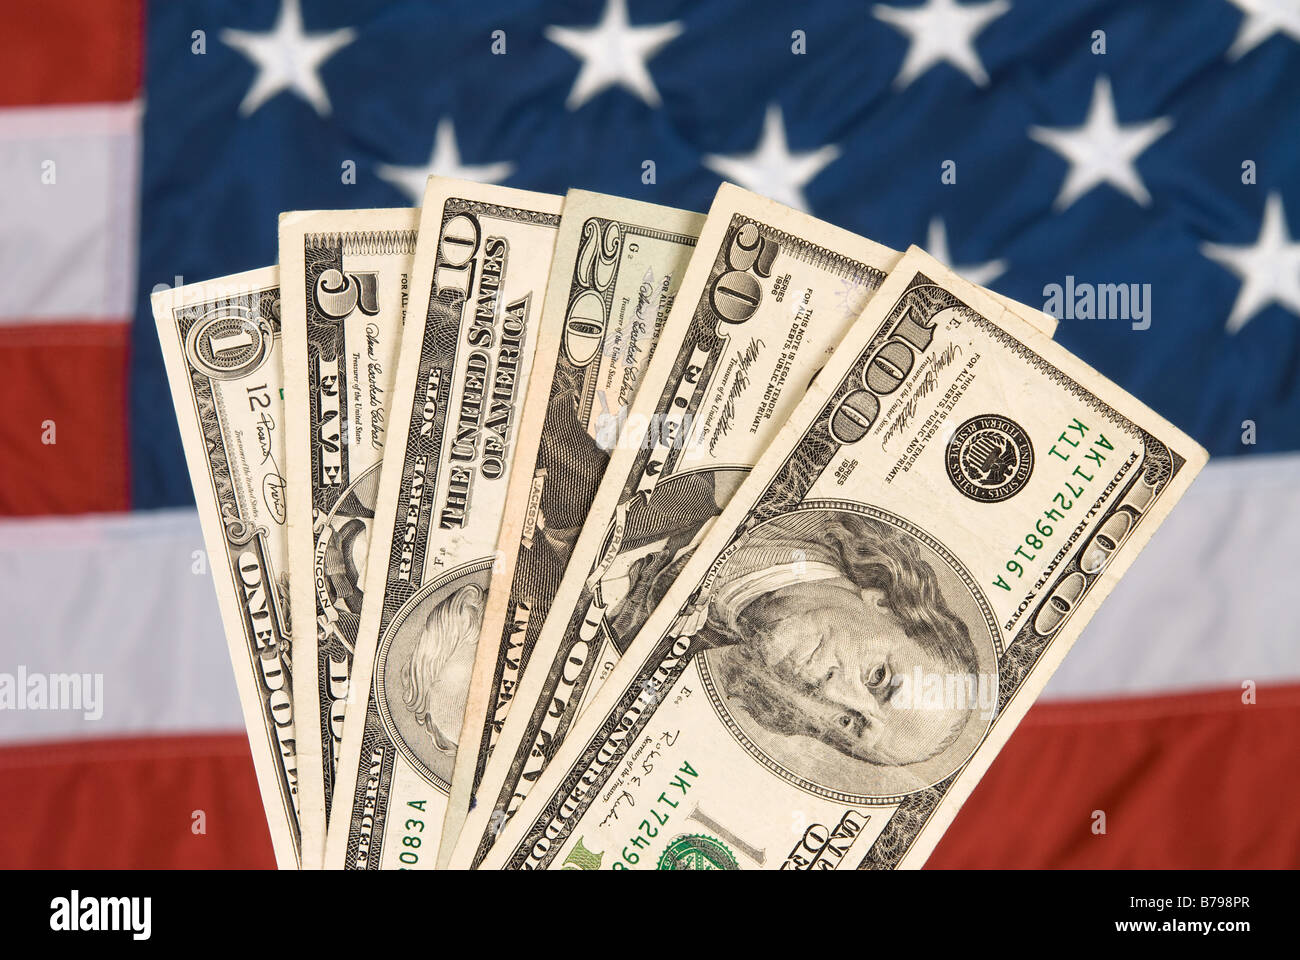 American currency against an American flag backdrop Stock Photo